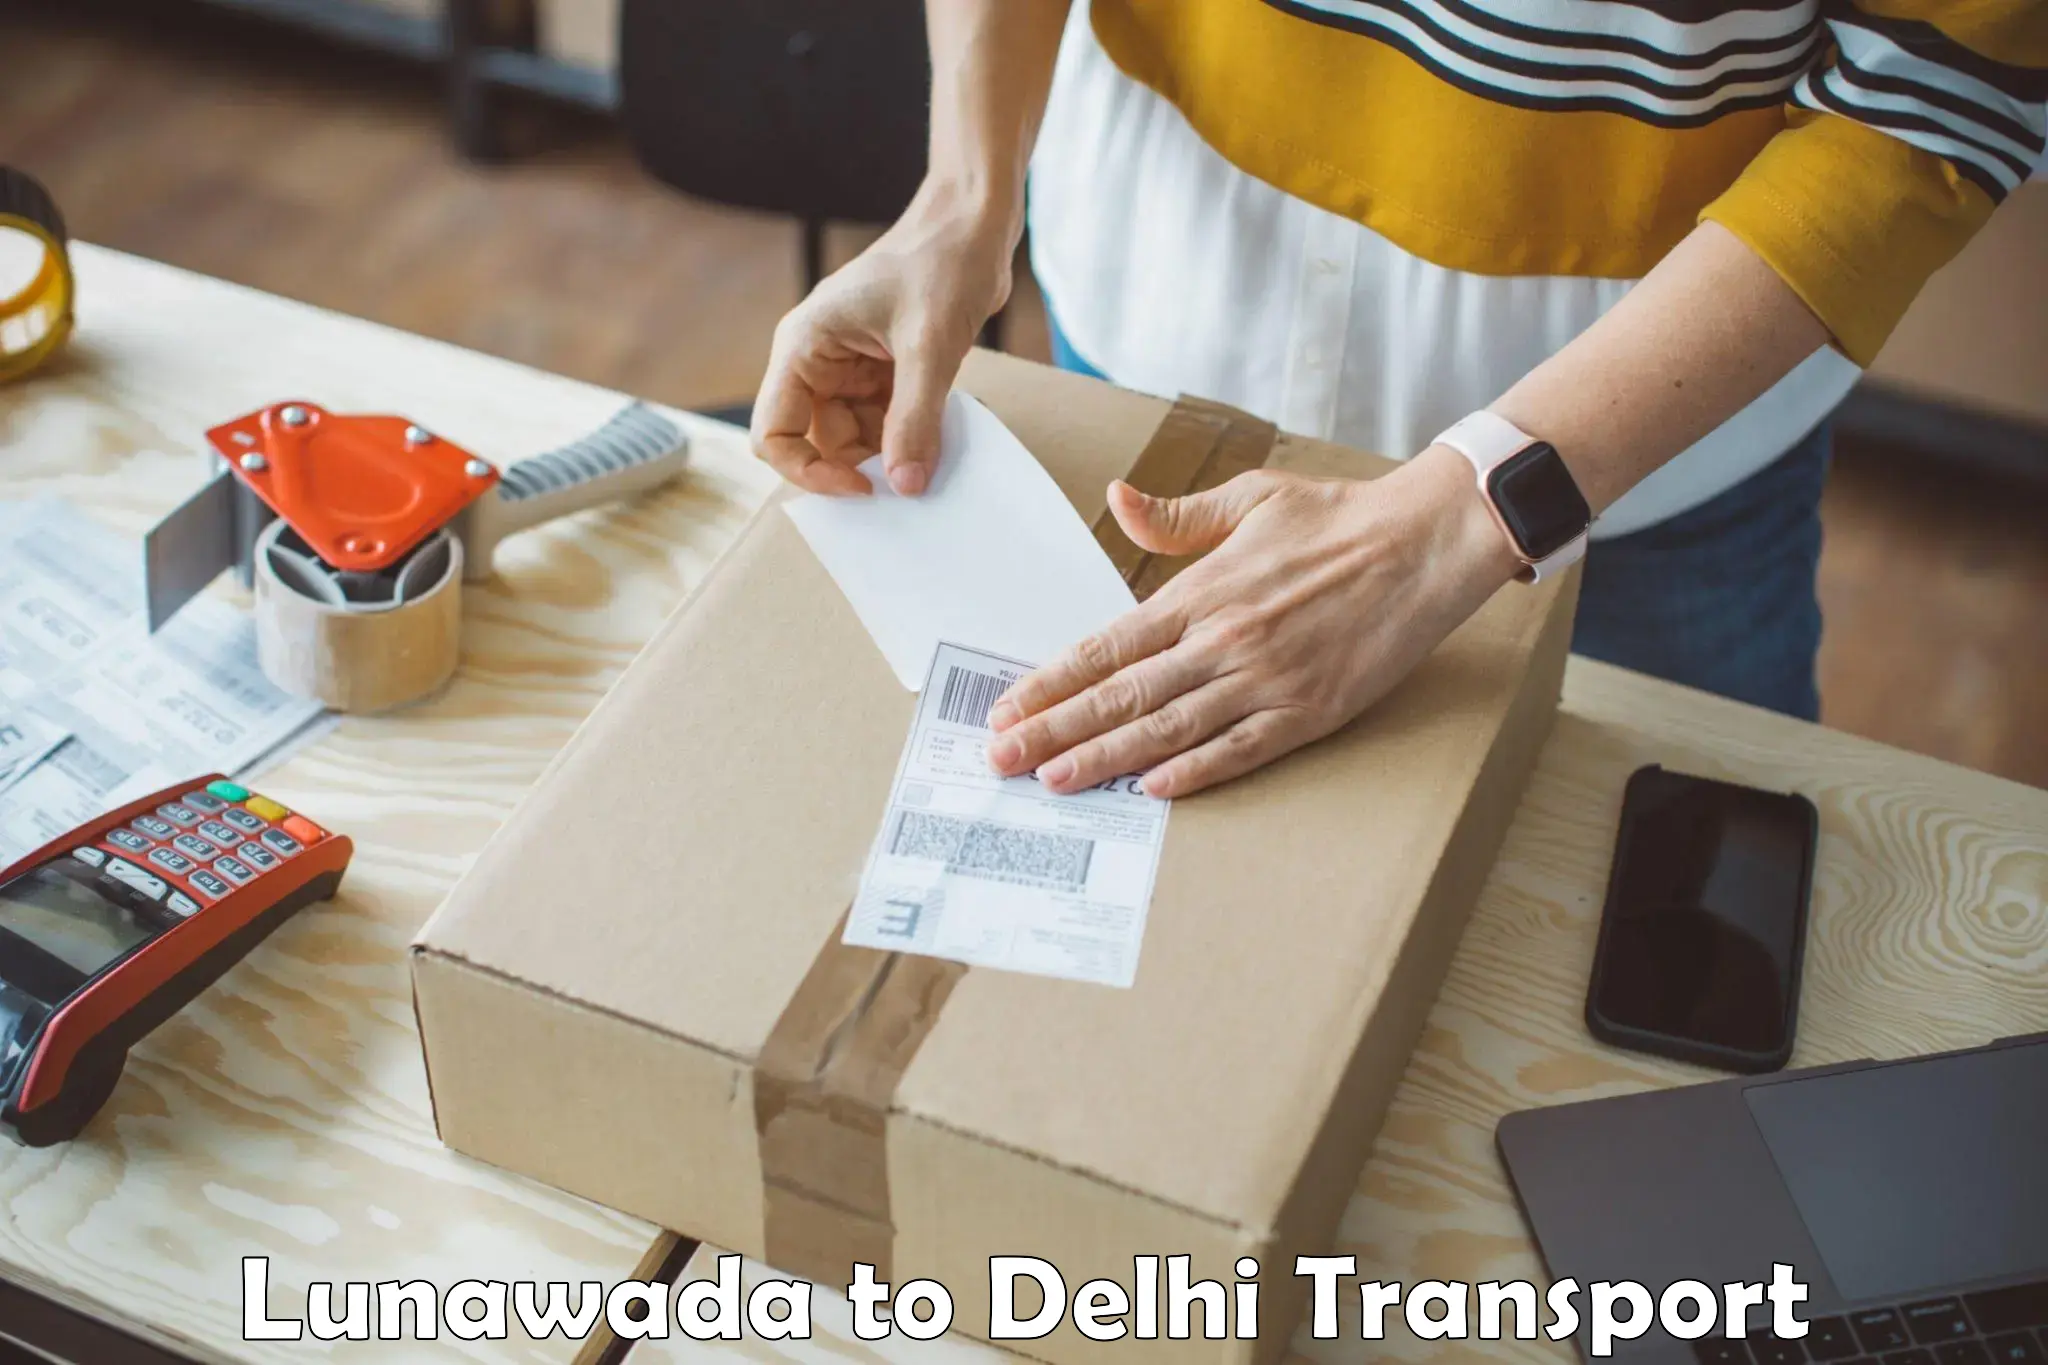 Domestic goods transportation services Lunawada to NCR